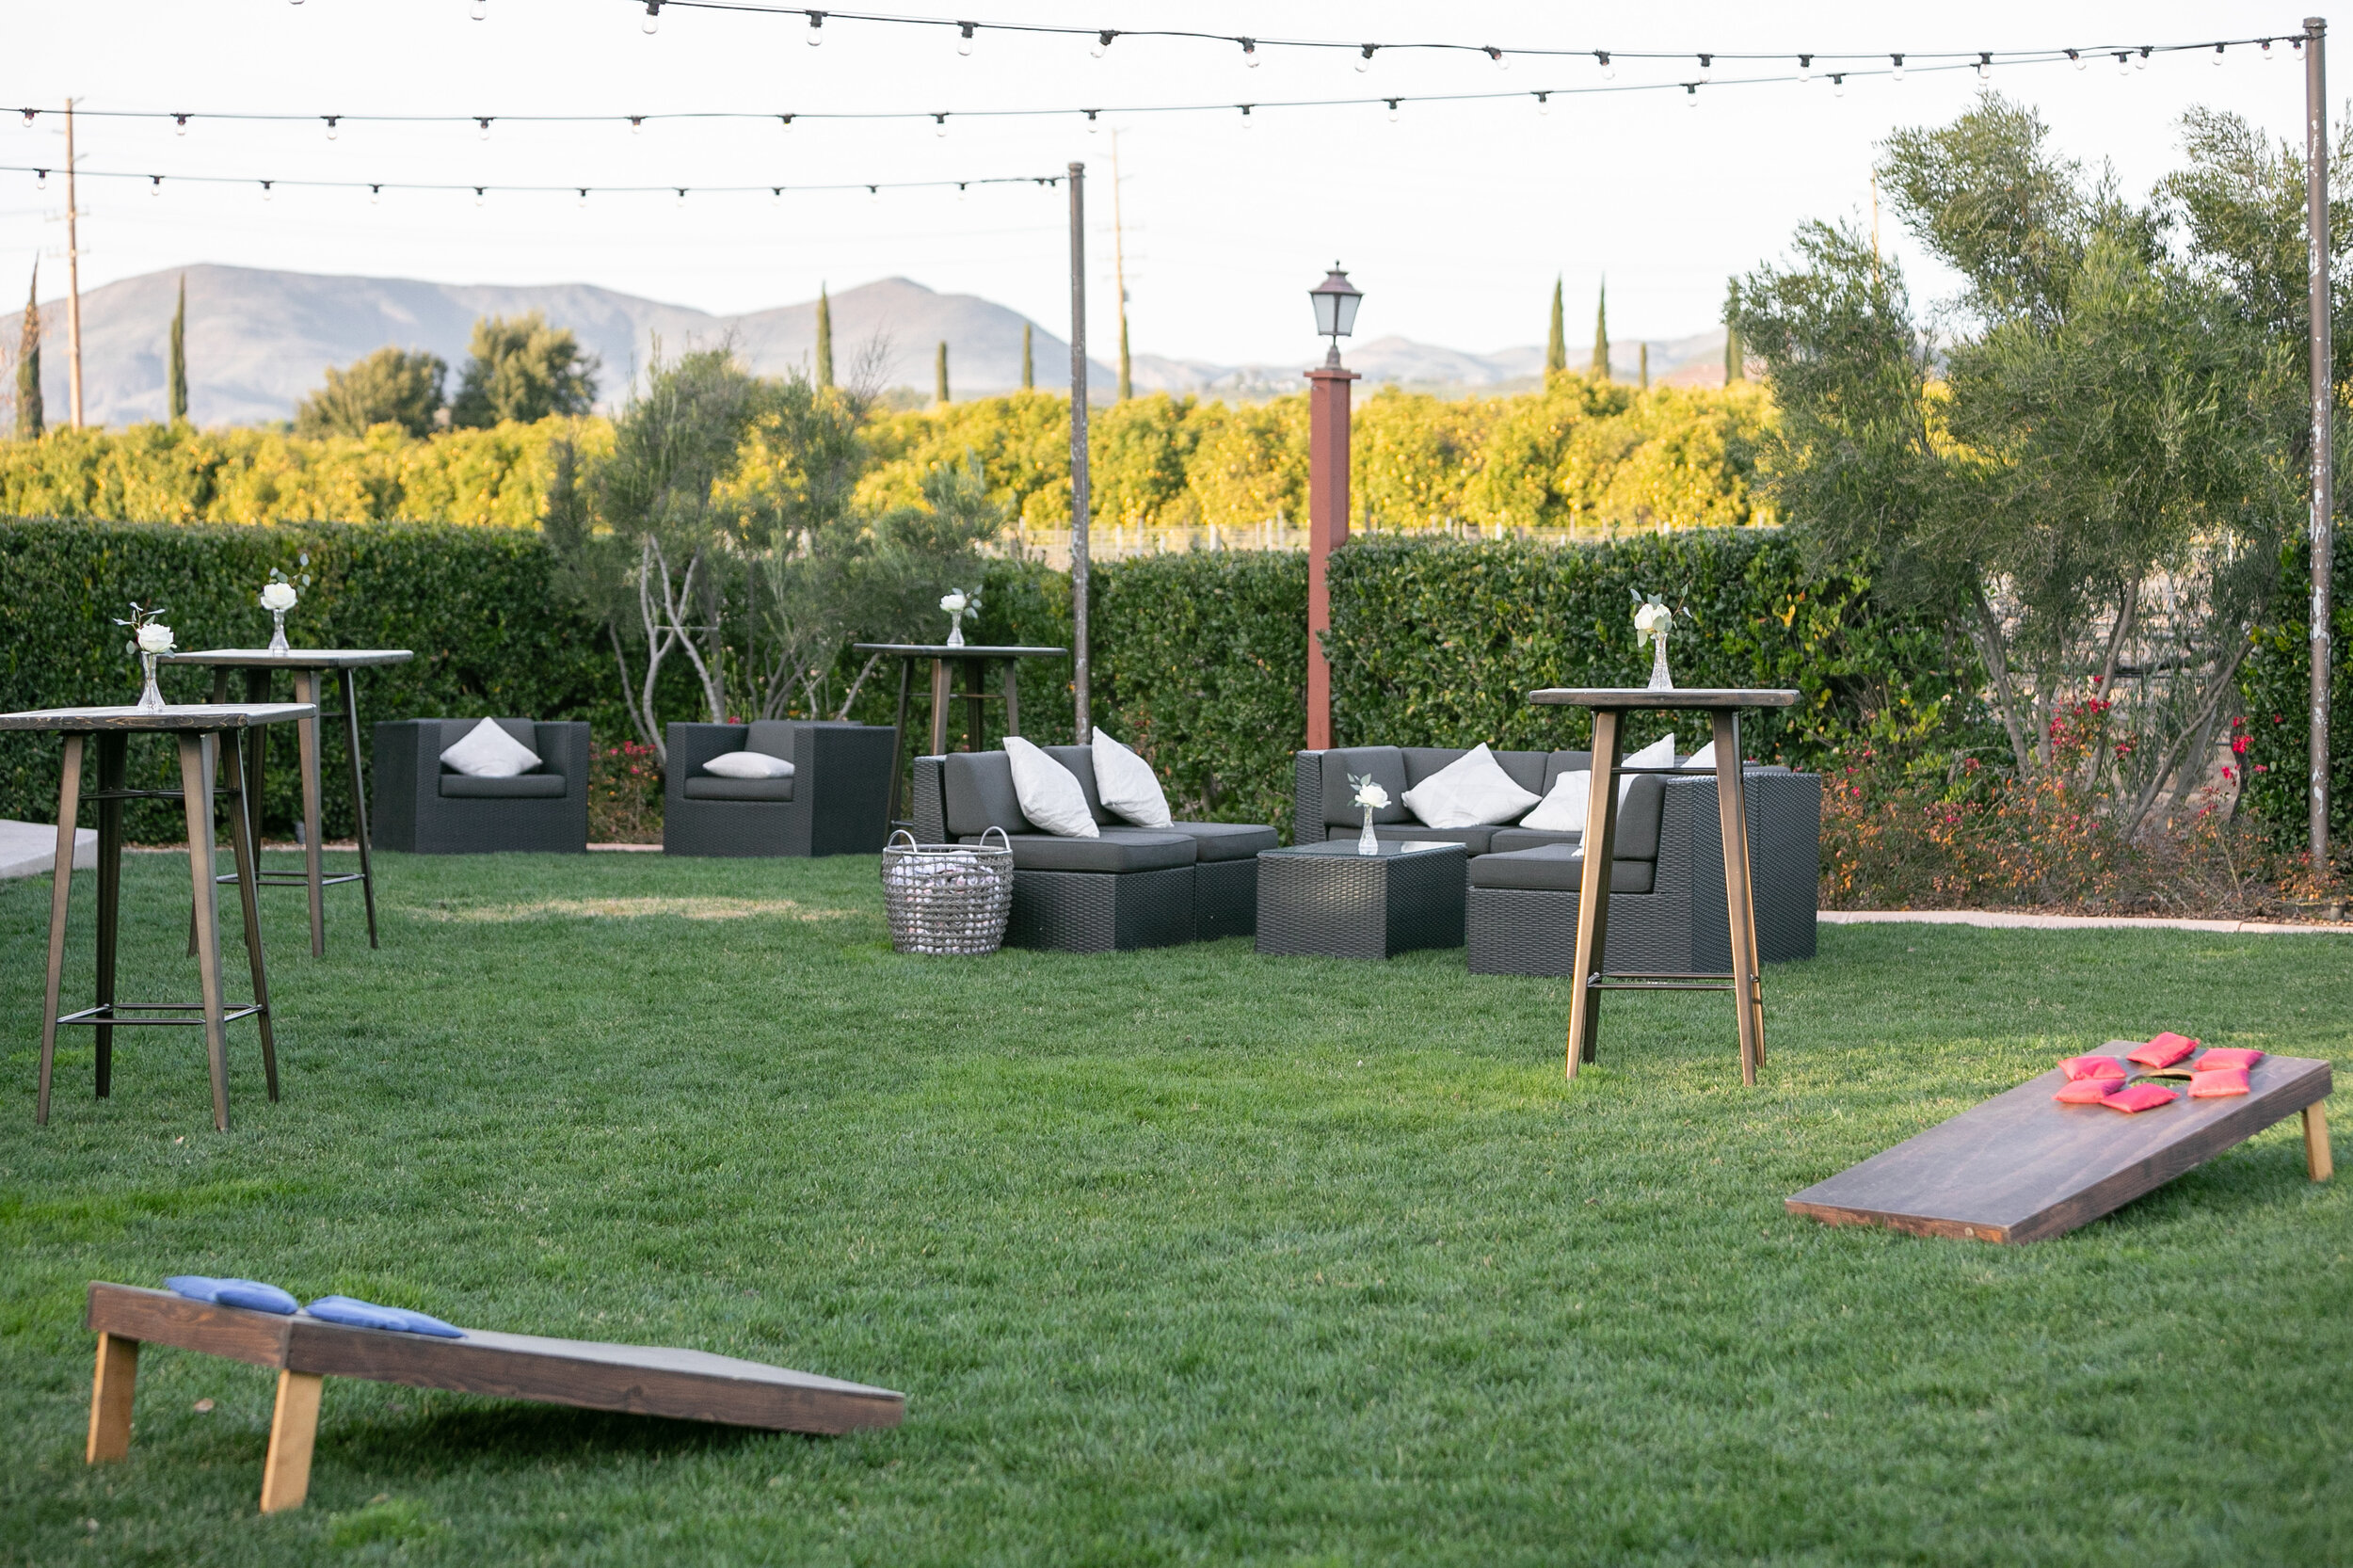 belly bar tables &amp; lawn games in Vineyard View venue